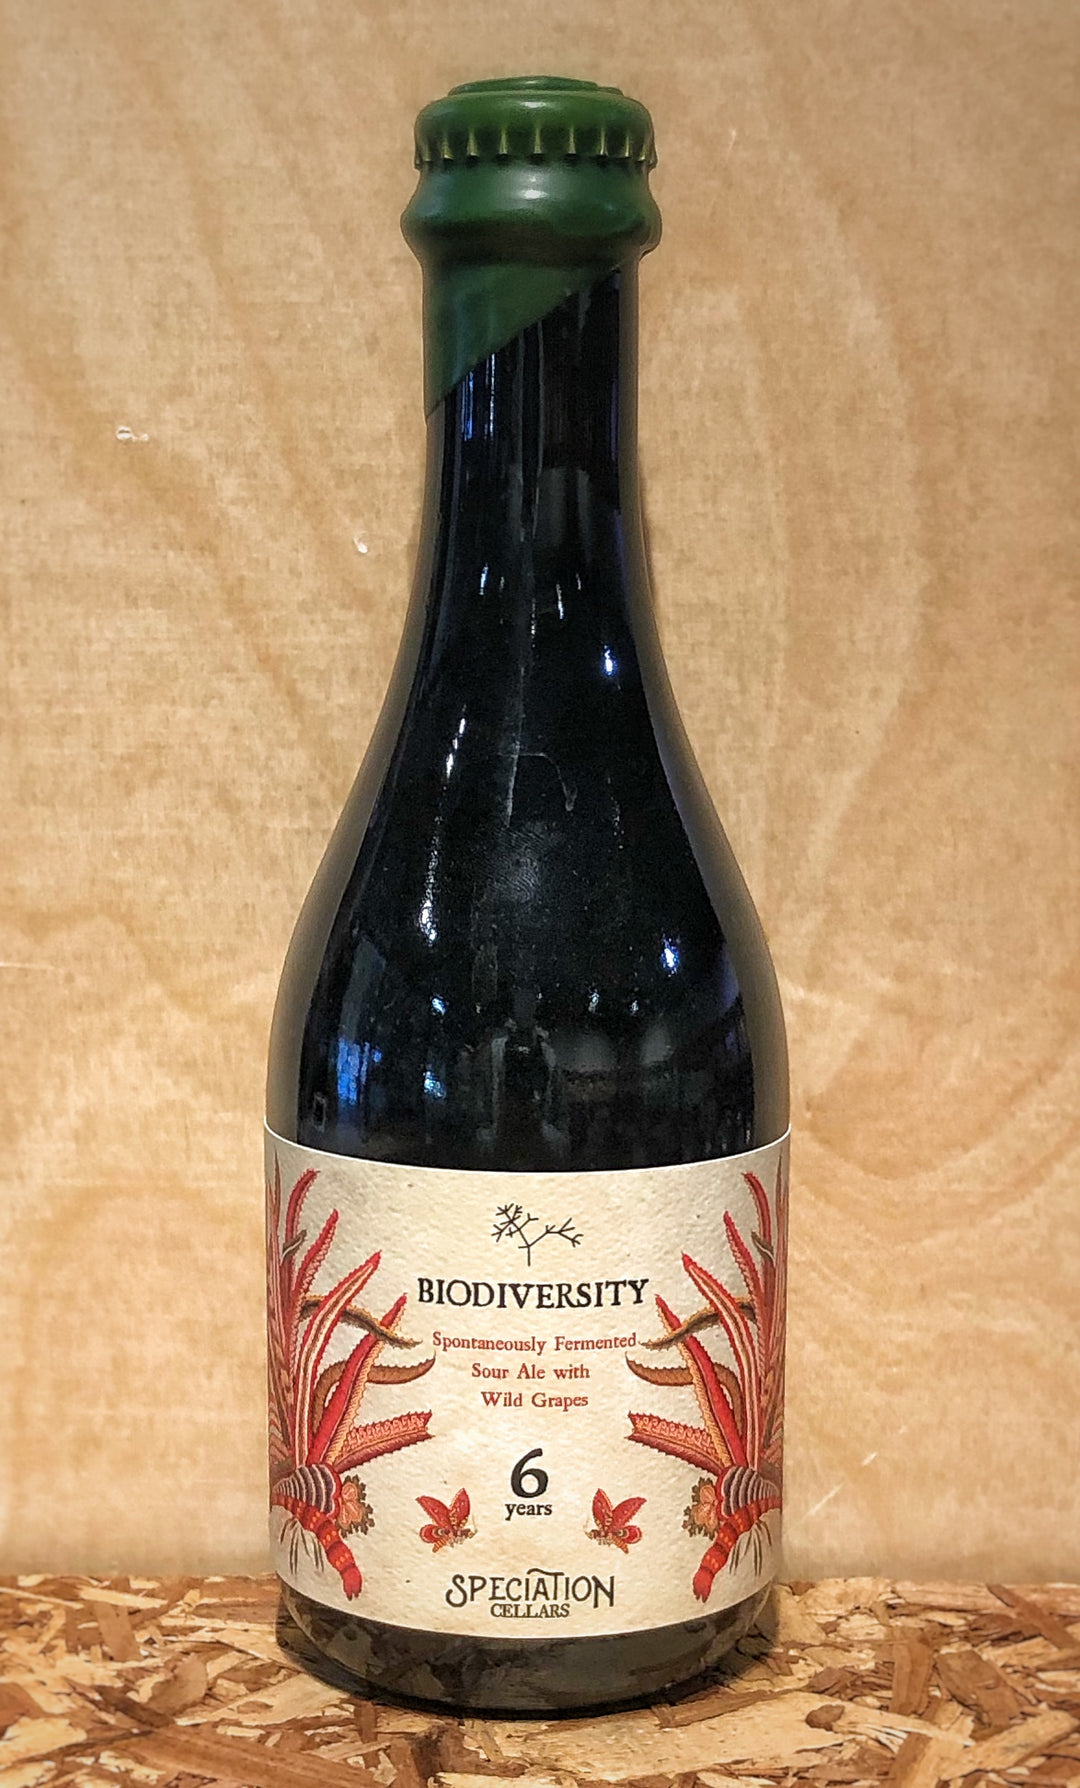 Speciation Artisan Ales 'Biodiversity' Spontaneously Fermented Sour Ale with Wild Grapes (Grand Rapids, MI)